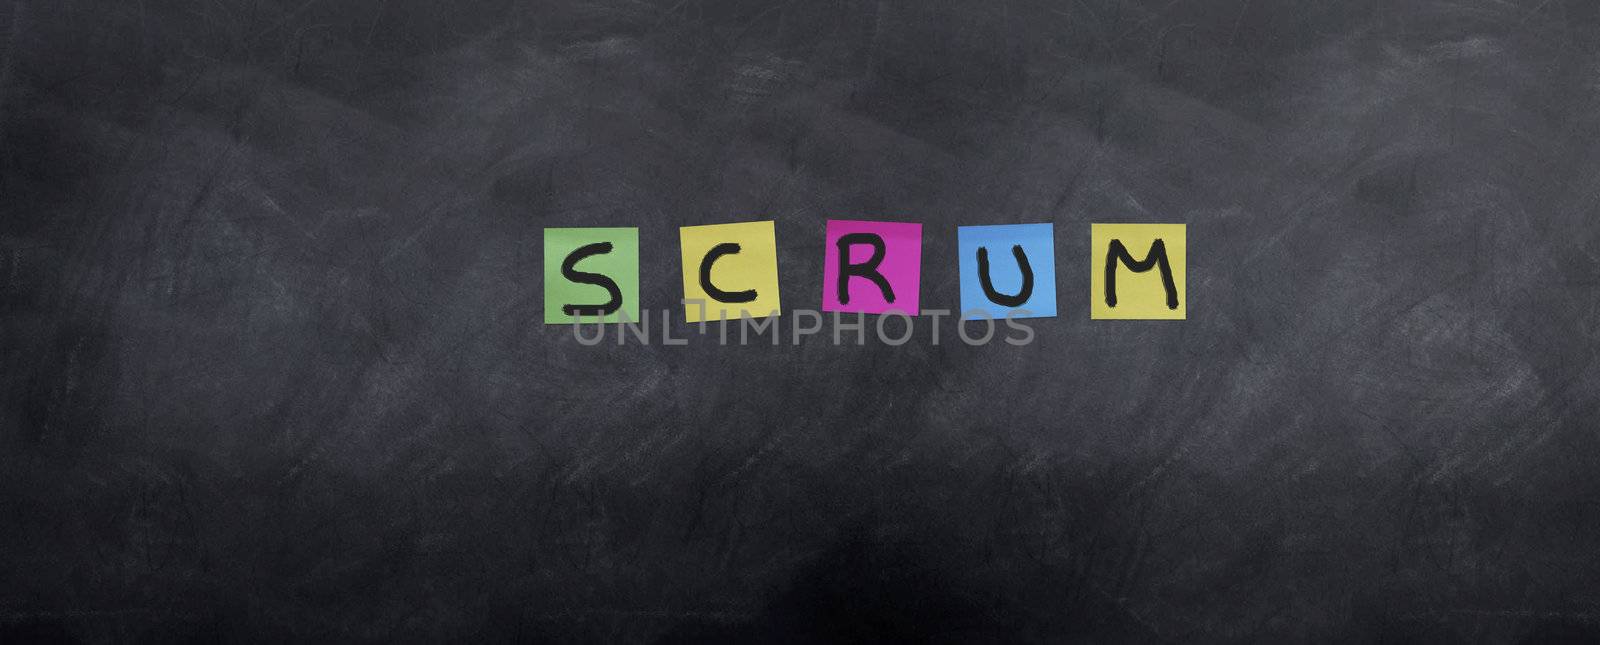 The Agile project methodology 'Scrum' is spellt on a blackboard with post it notes.